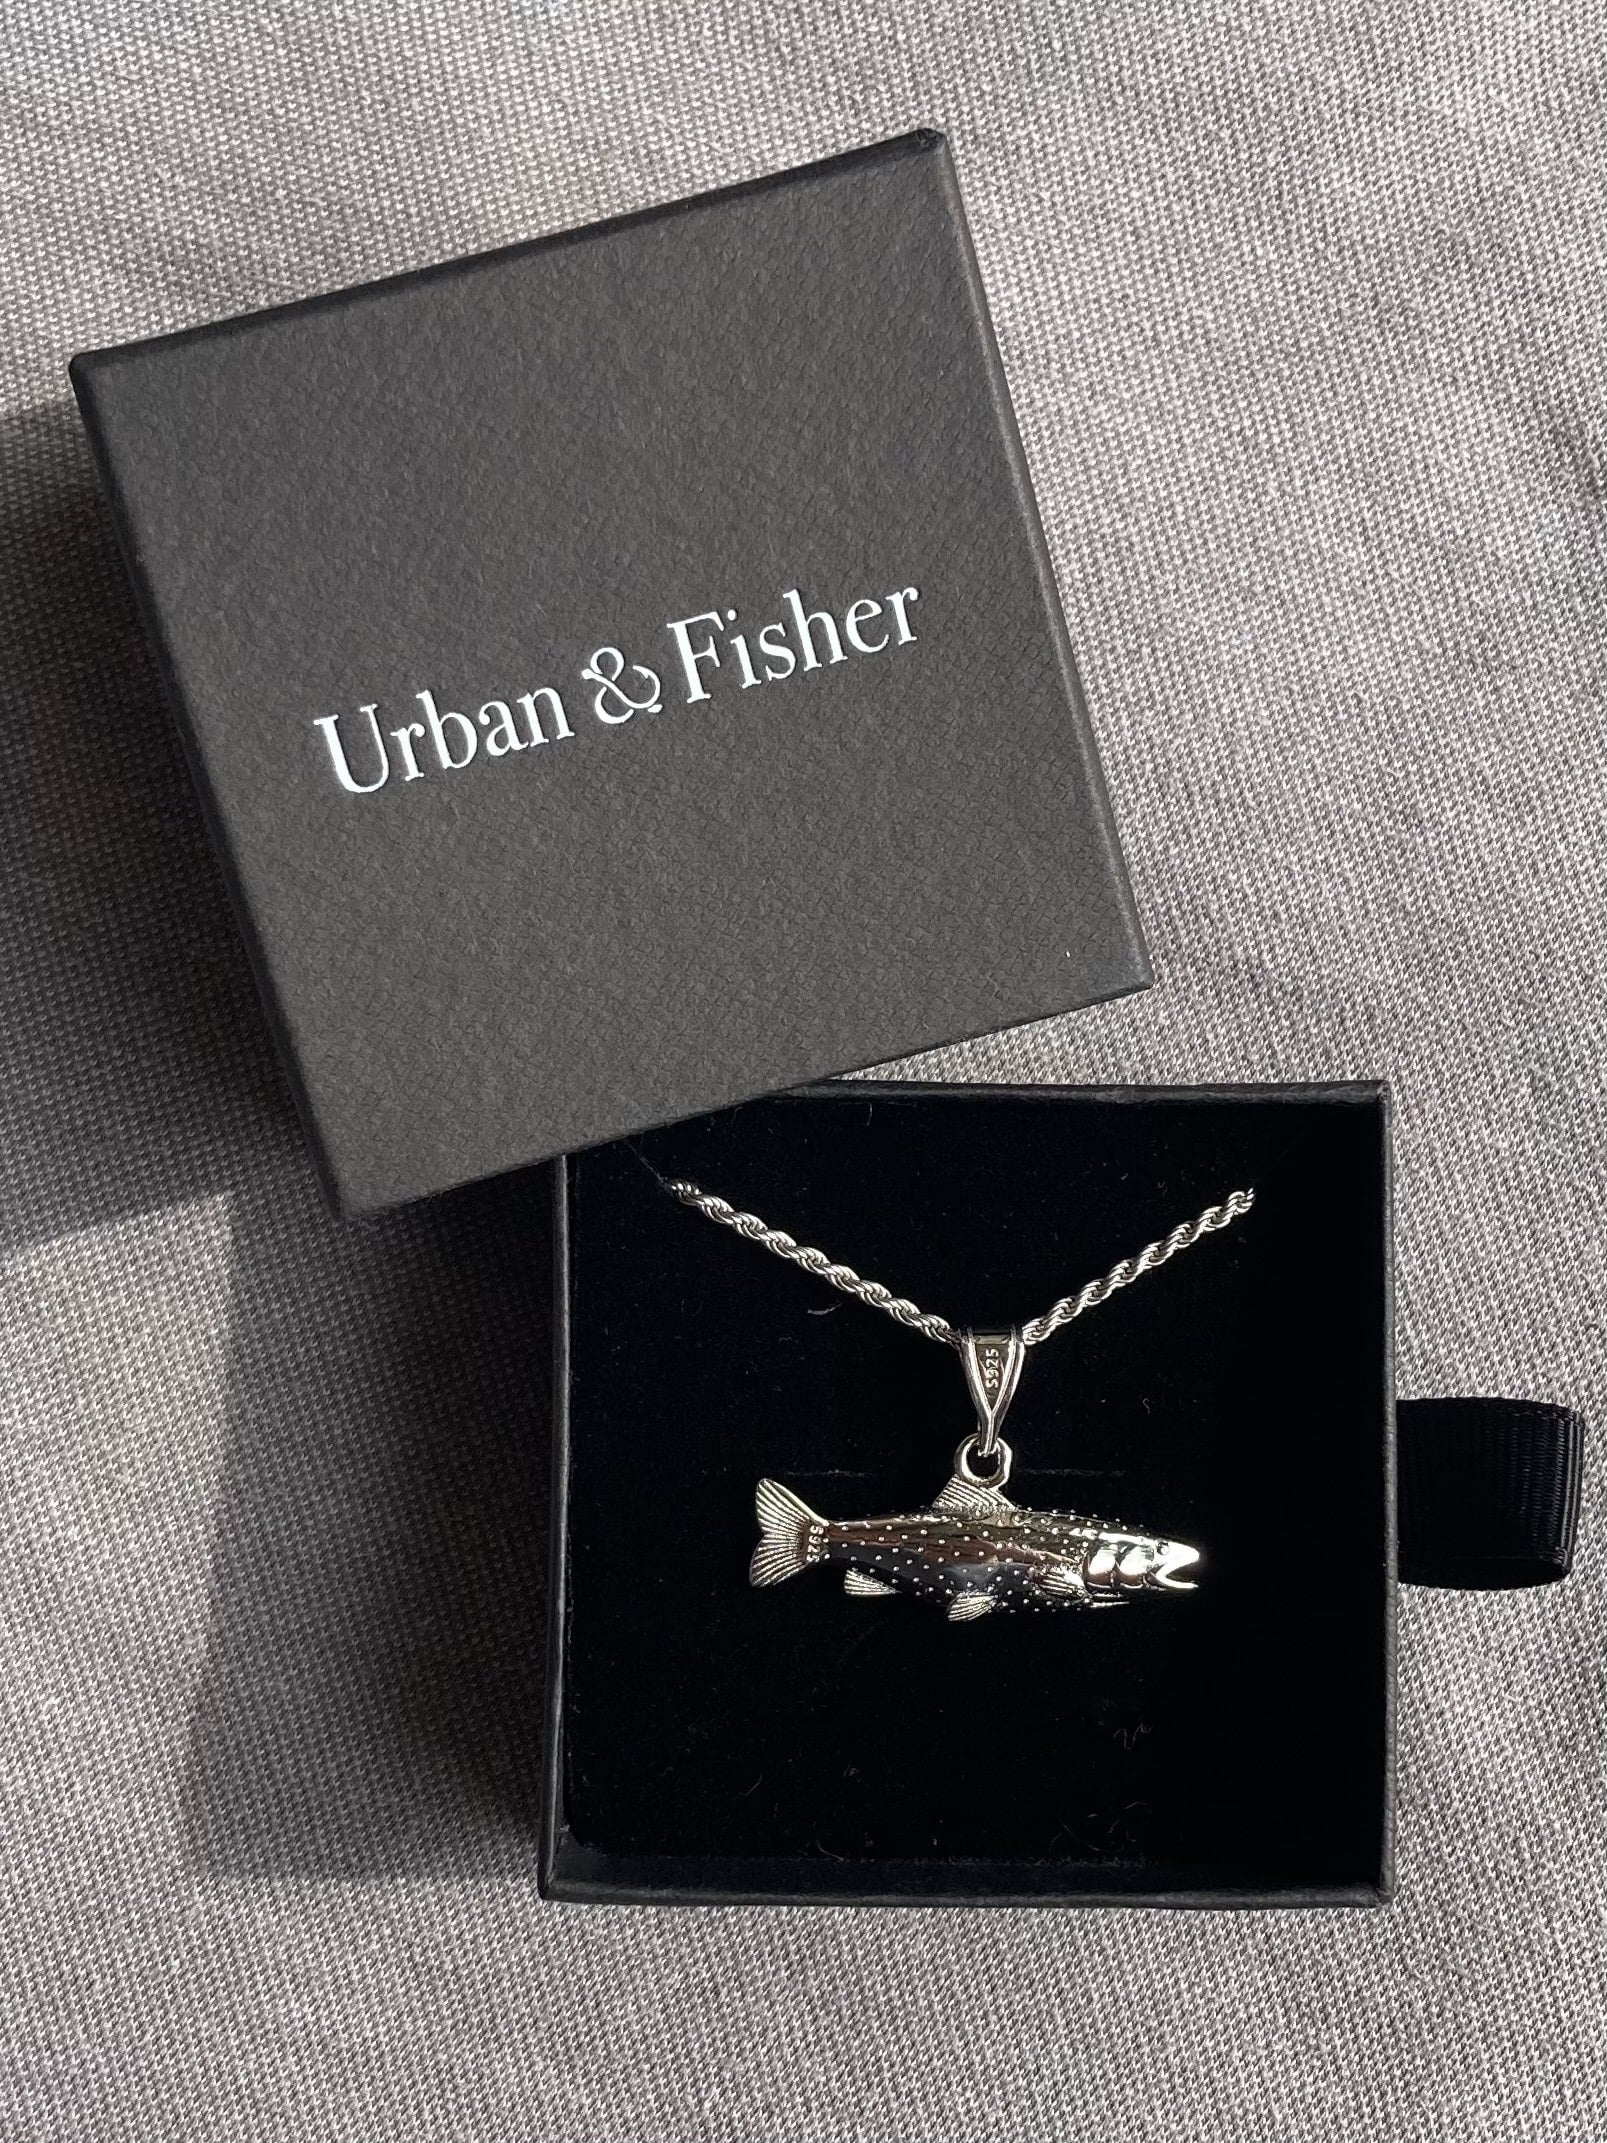 Fishing necklace trout – Urban & Fisher | Schmuck-Sets